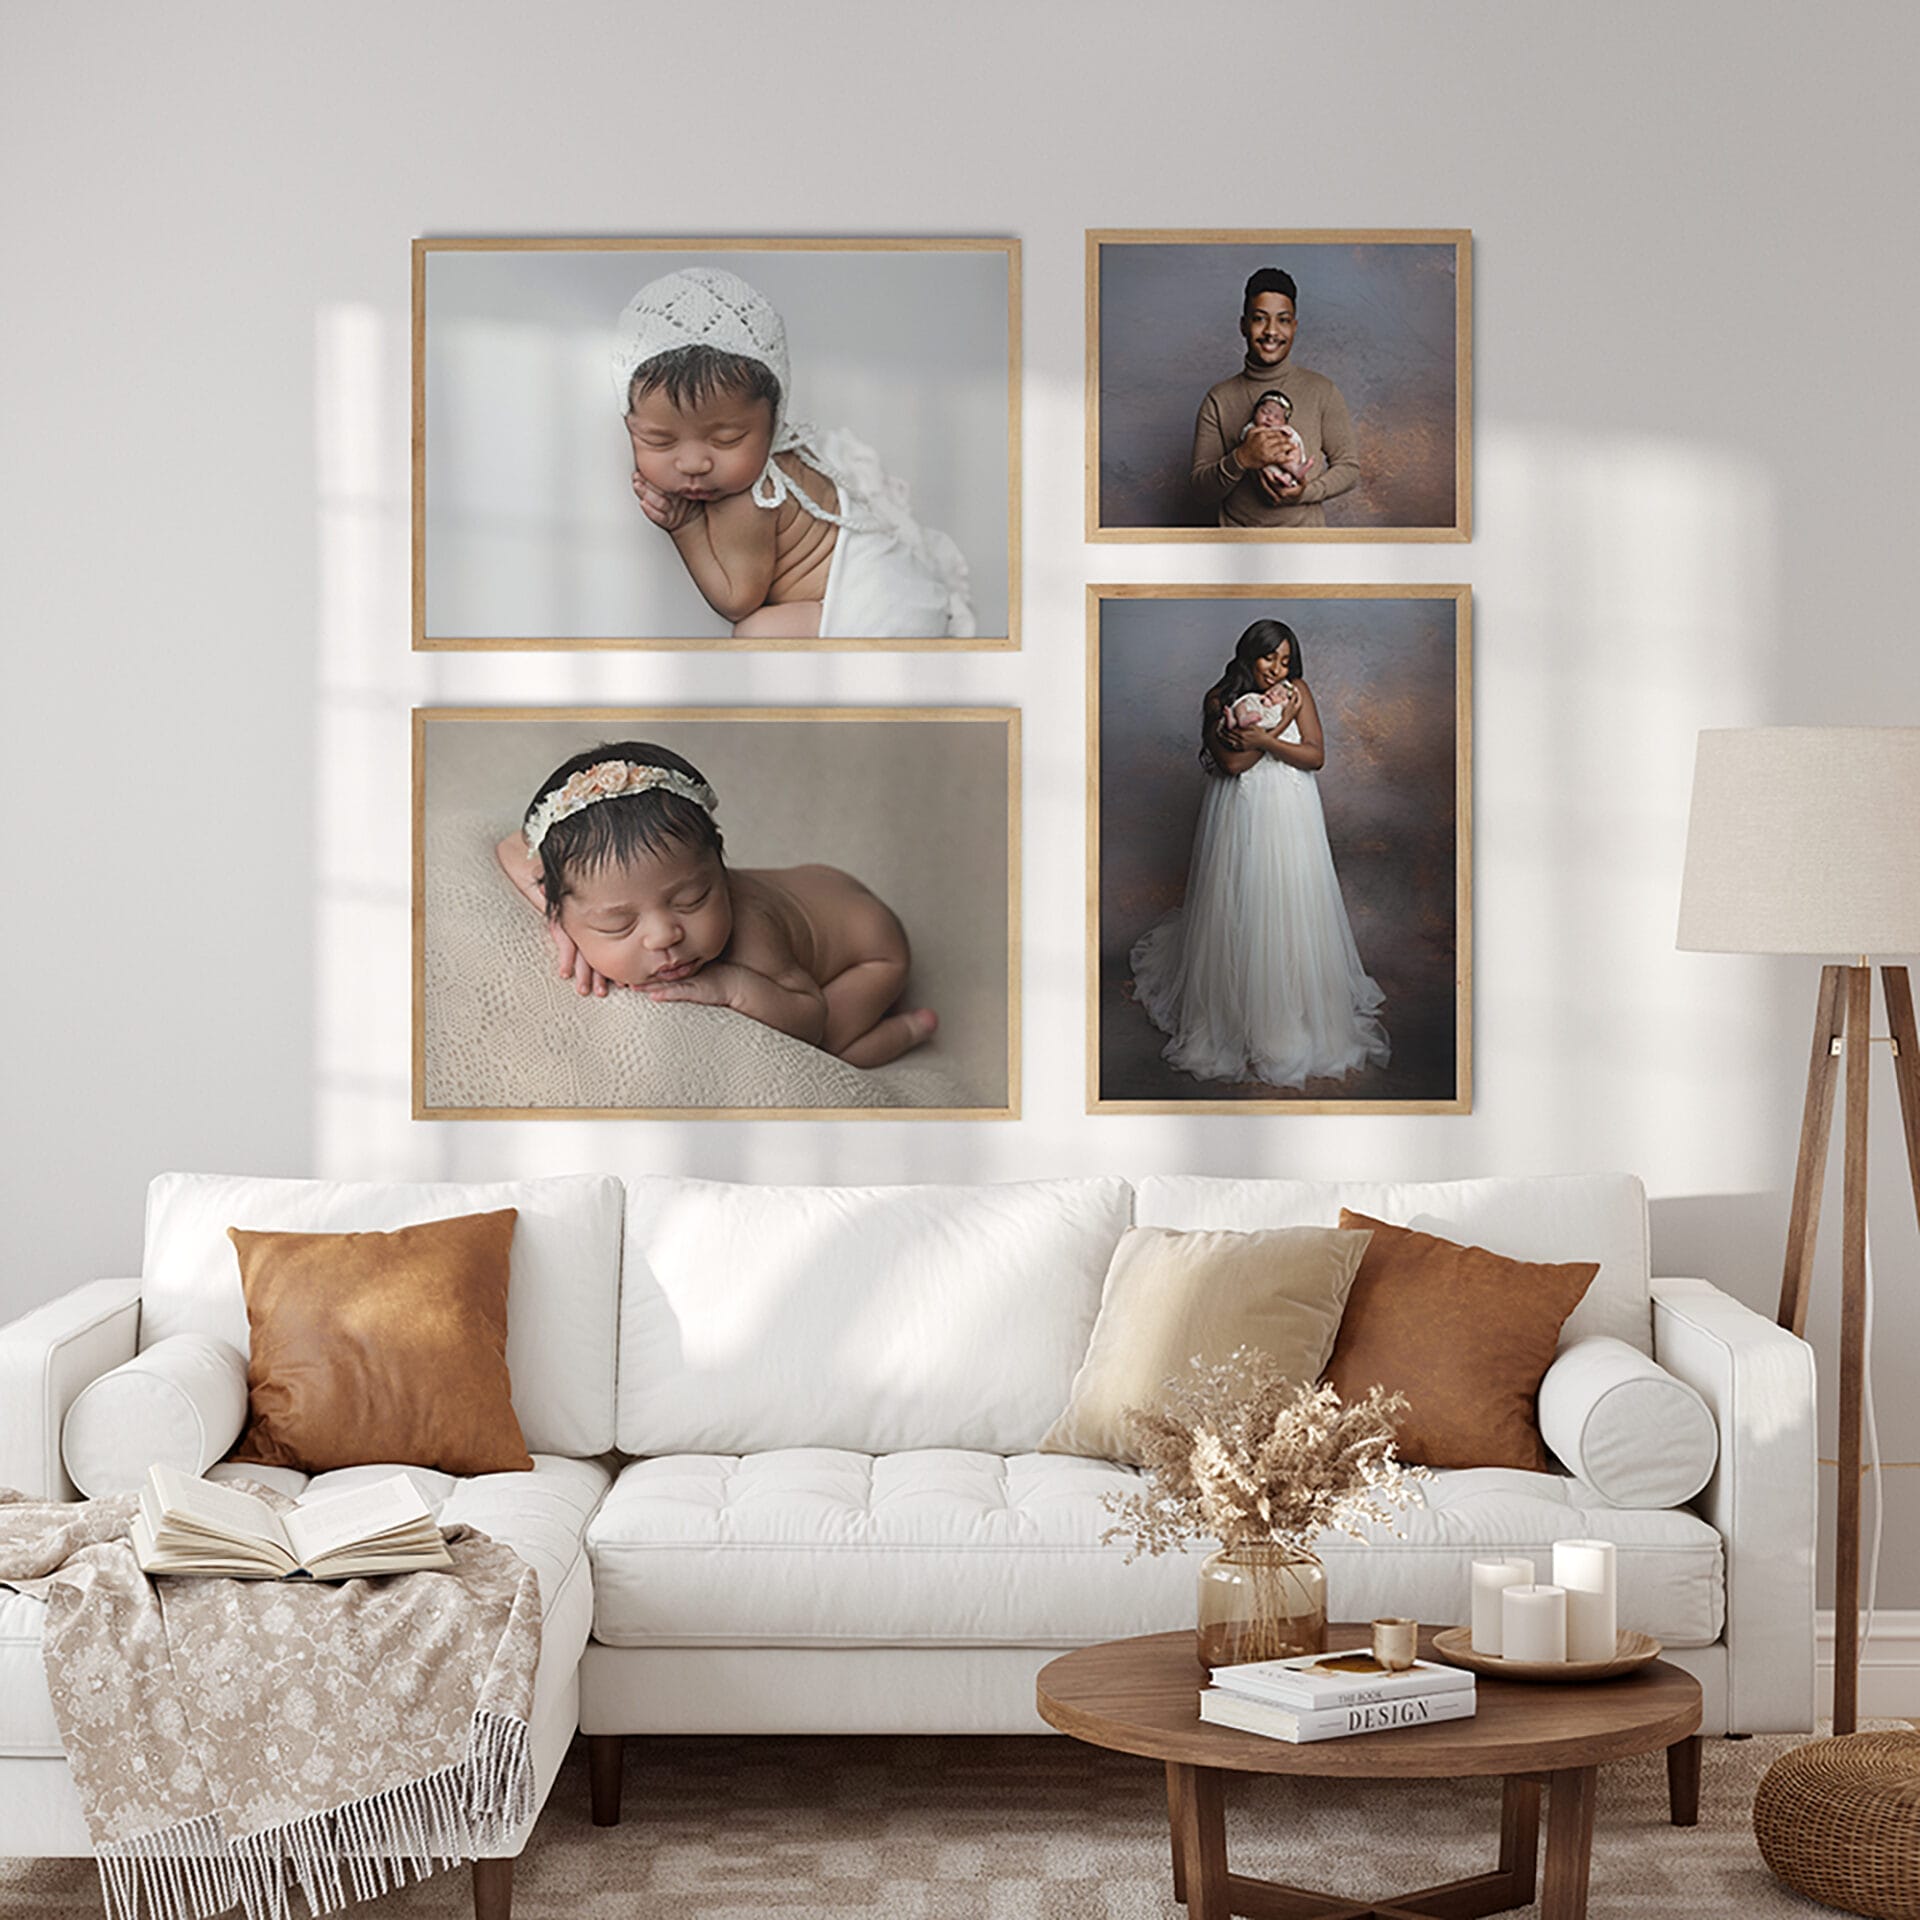 A wall art of a newborn baby girl and her mom and dad in a modern living room.